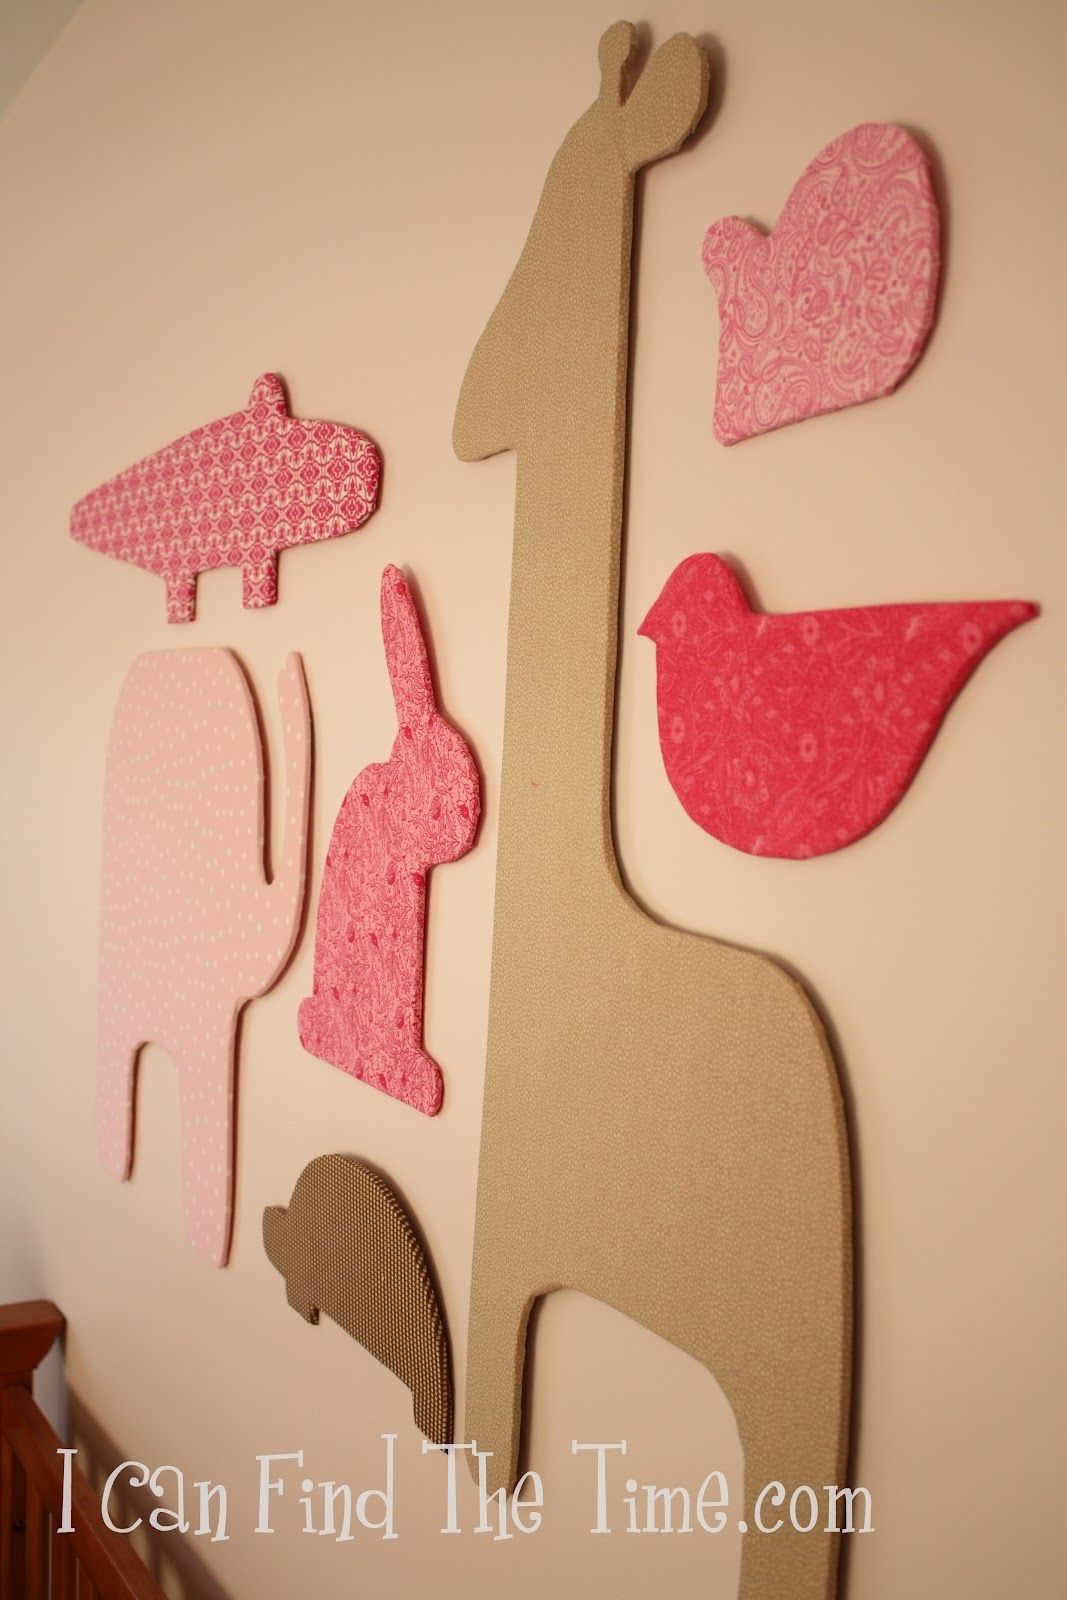 Easy Fabric Silhouette Wall Art Throughout Most Current Foam Fabric Wall Art (View 8 of 15)